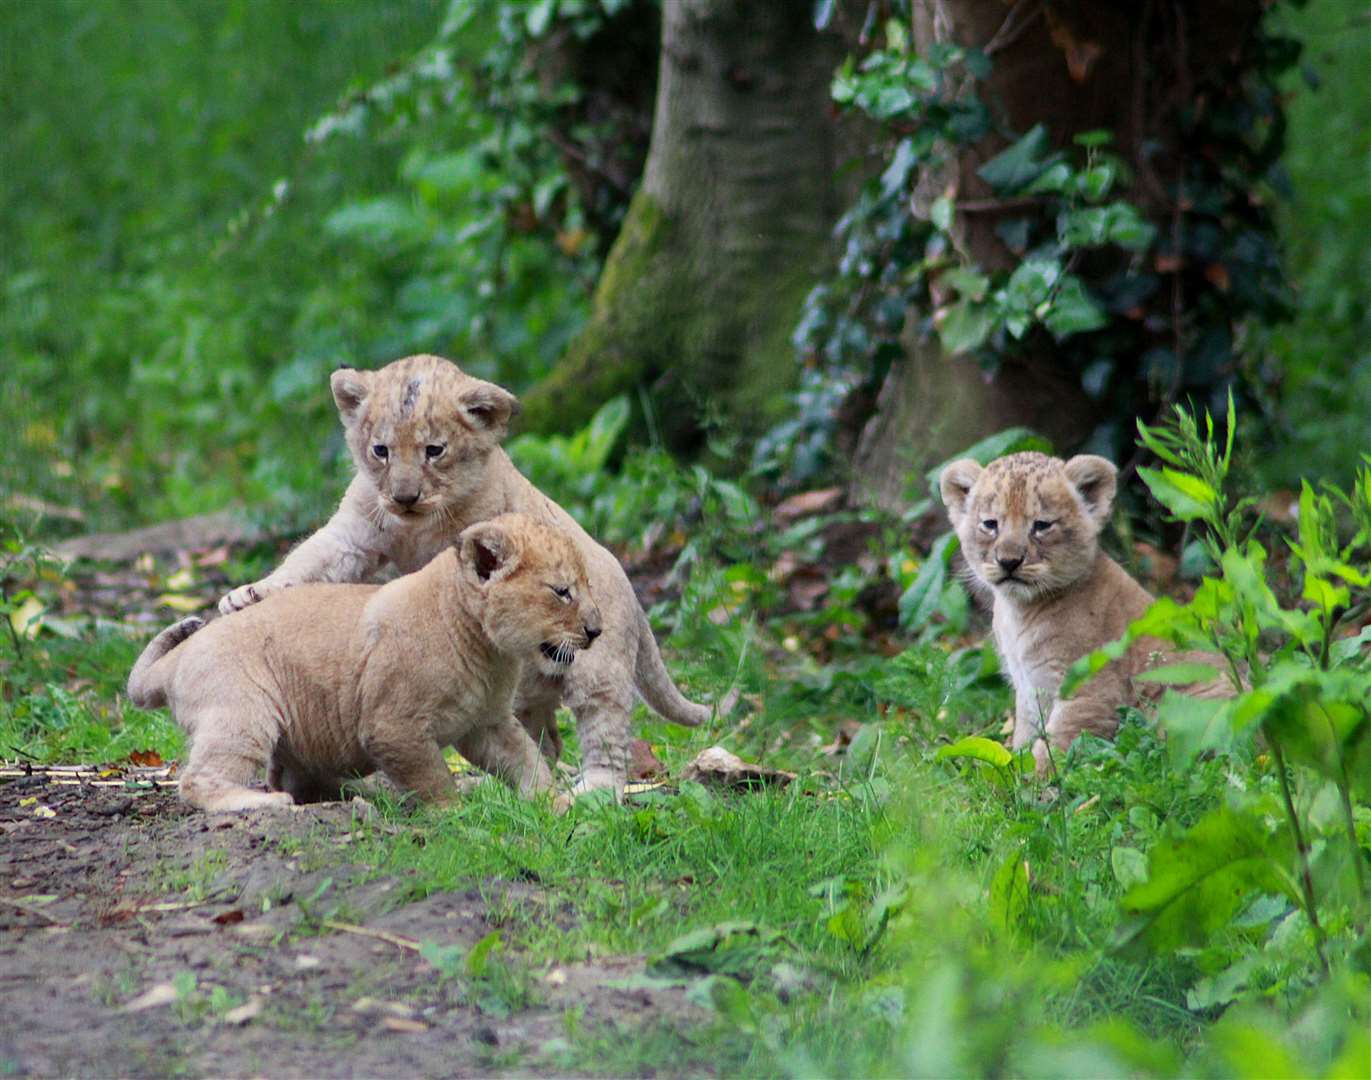 Lion cubs at Port Lympne - they will look a bit different now!